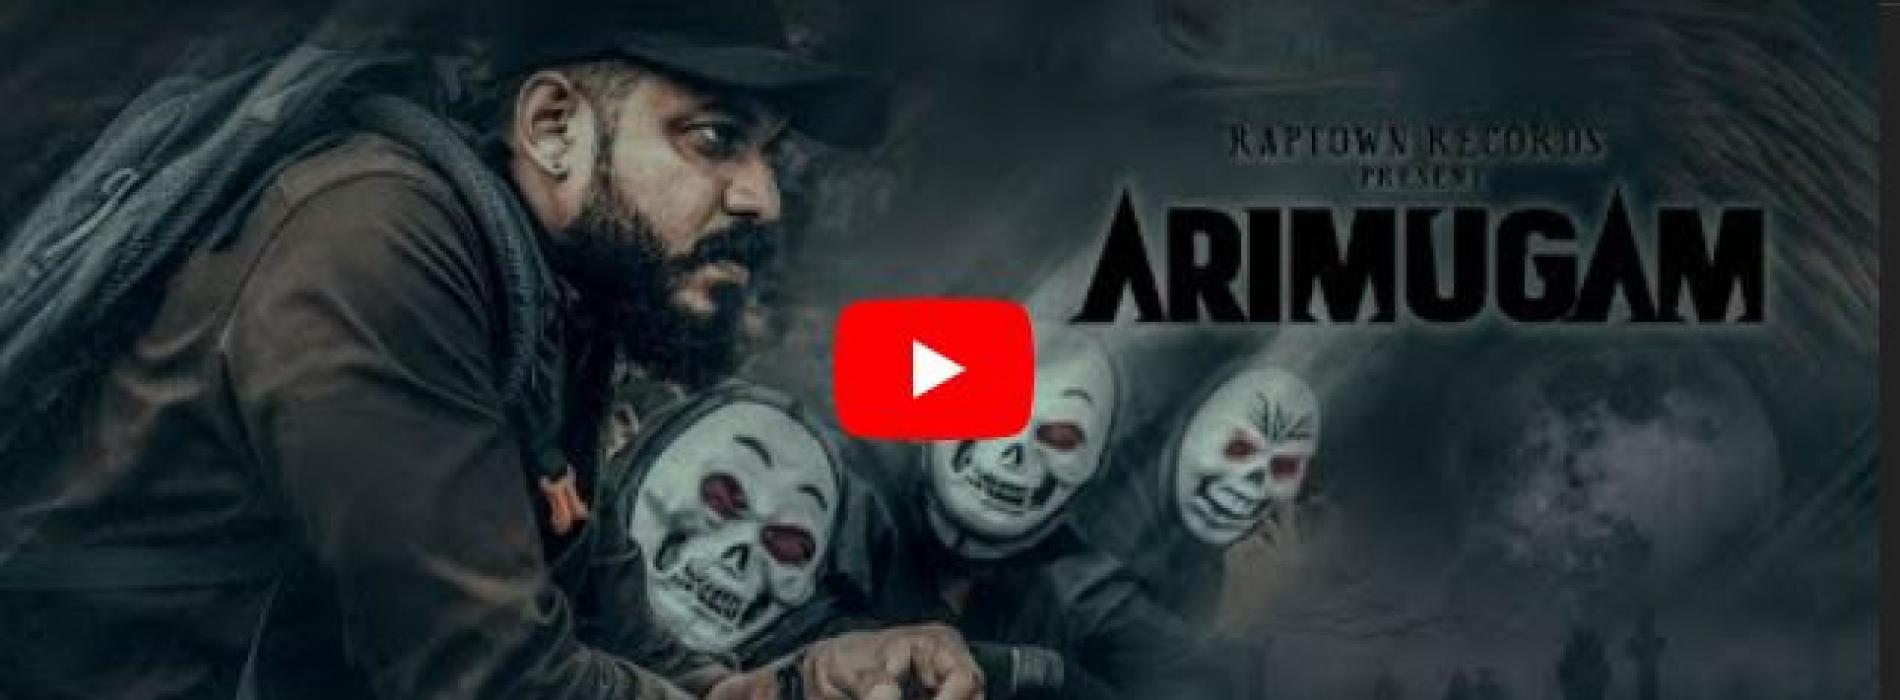 New Music : Jay DC – Arimugam (Official Music Video) | Tamil Rap | Raptown Records